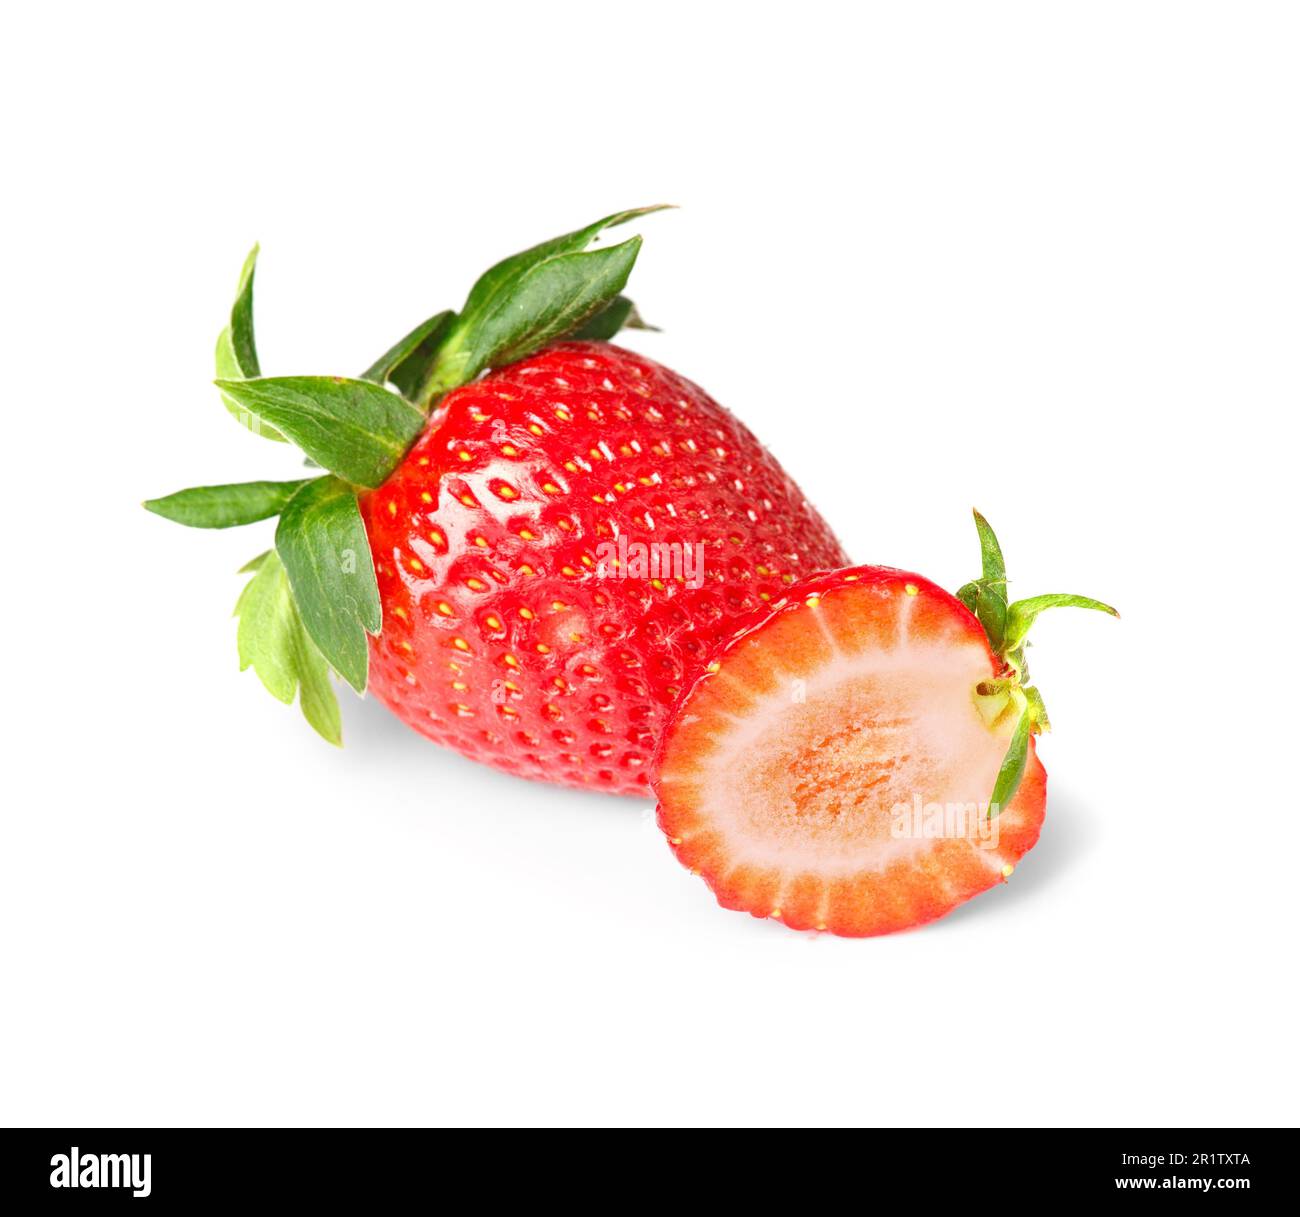 Fresh whole strawberries and half cut strawberries isolated on white background top view. Stock Photo